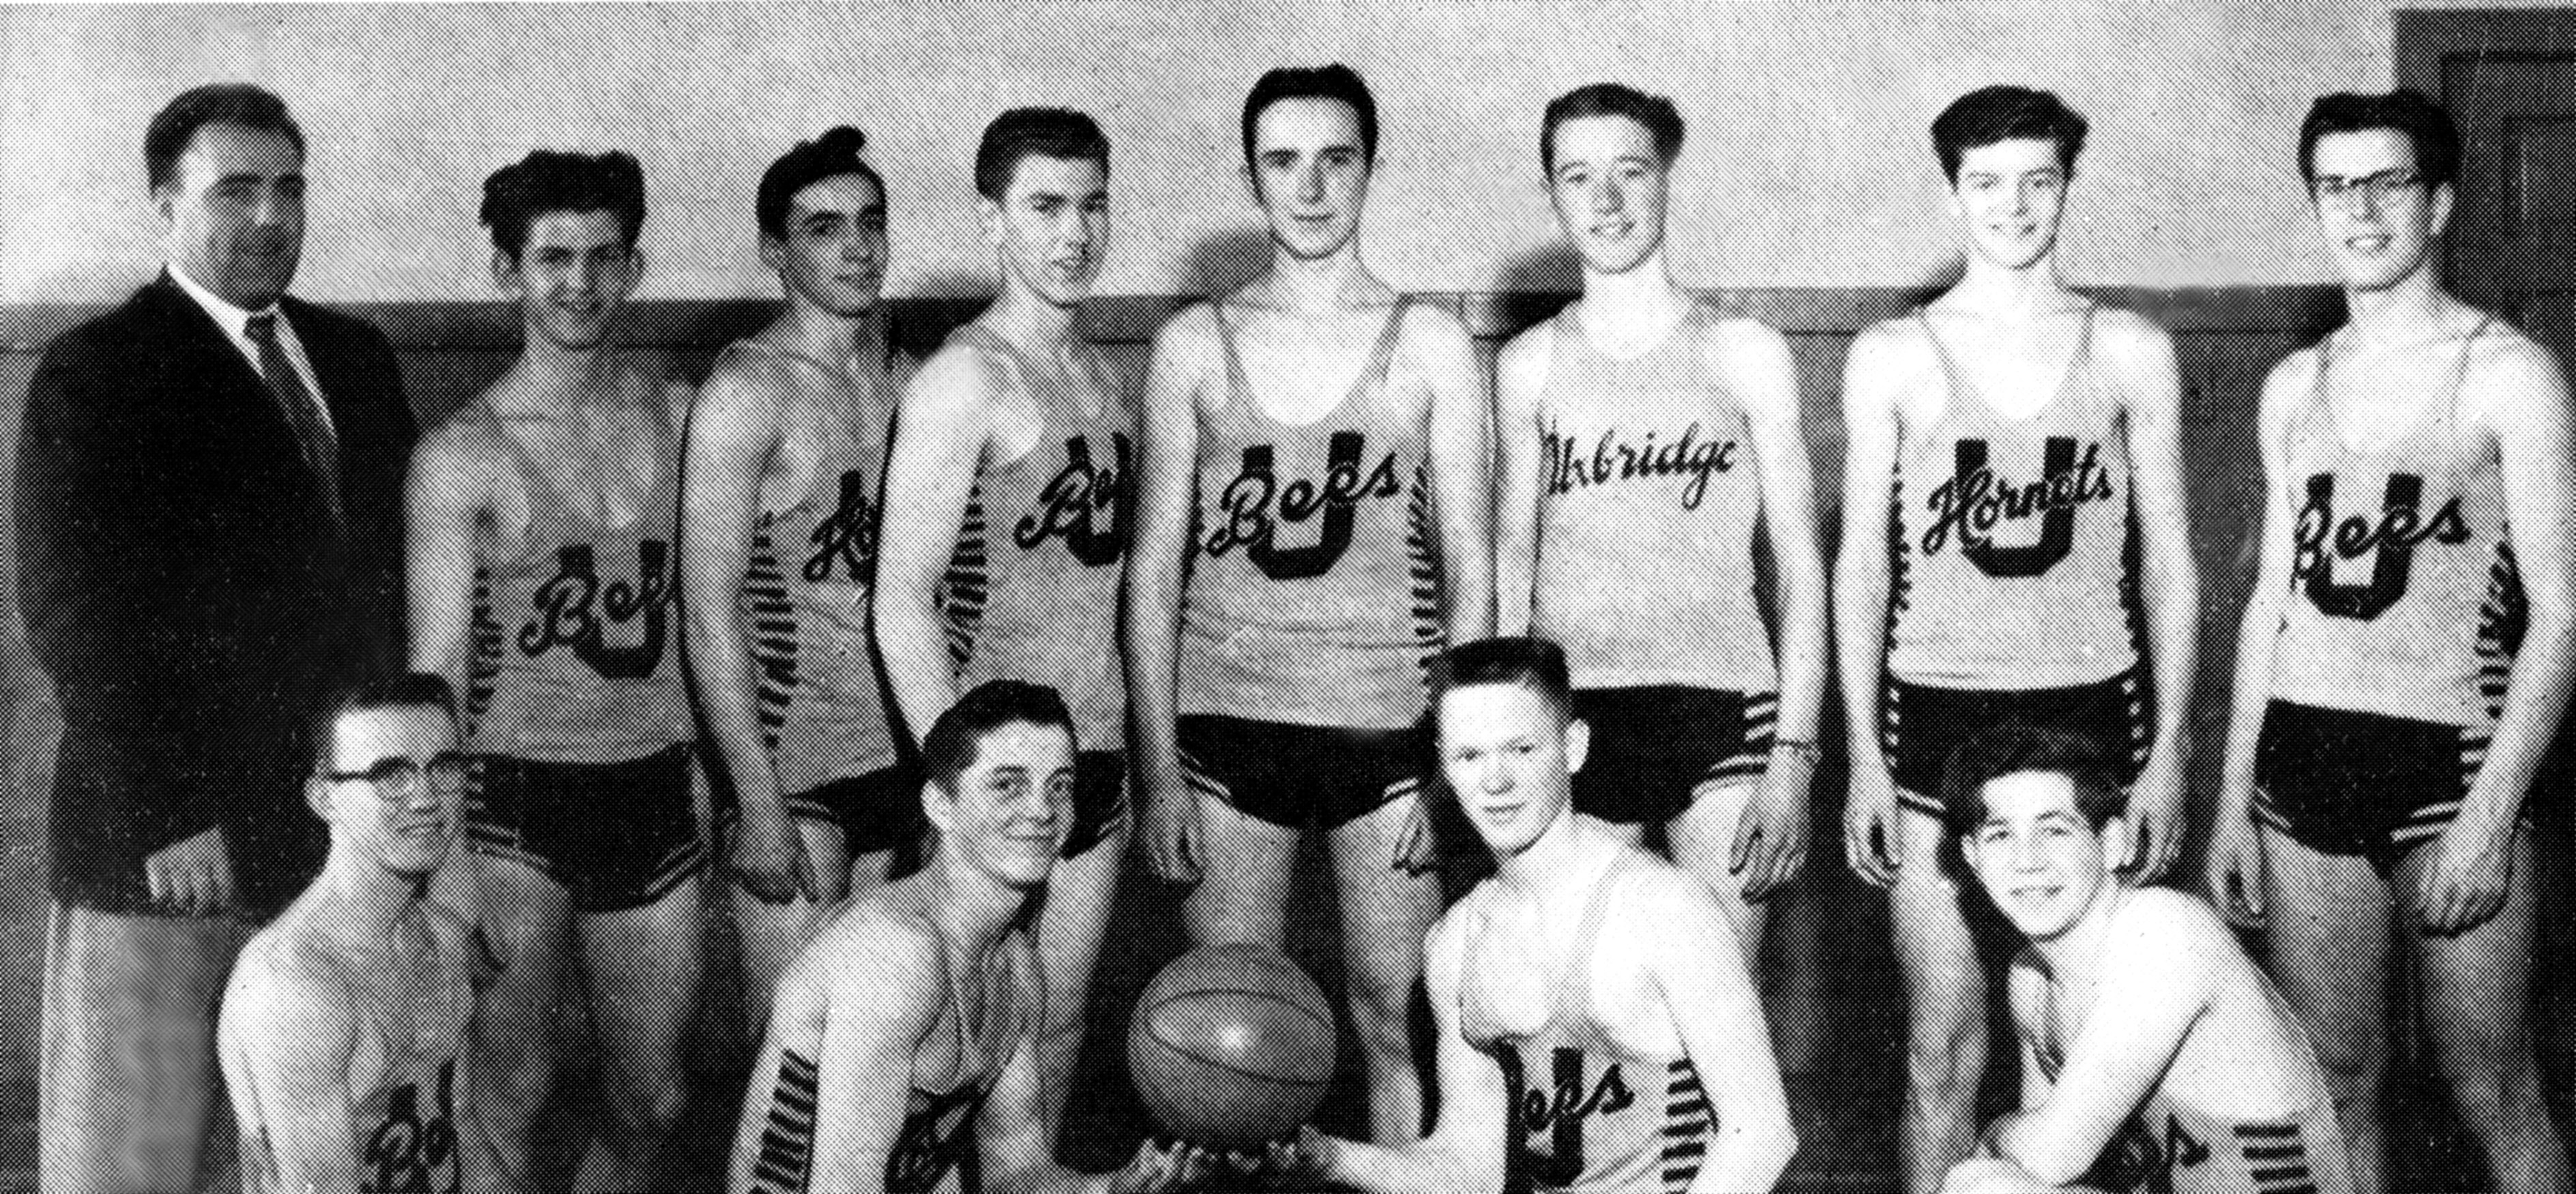 (Click to magnify) FRONT ROW: Larry Barton, L. Taylor, A. Oldham, J. Sargeant; BACK ROW: Mr. Ray Newton, K. Cornell, Bruce Shillinglaw, R. Peers, Ross Stevenson, Murray Prentice, P. Kennedy, D. Arbuckle.